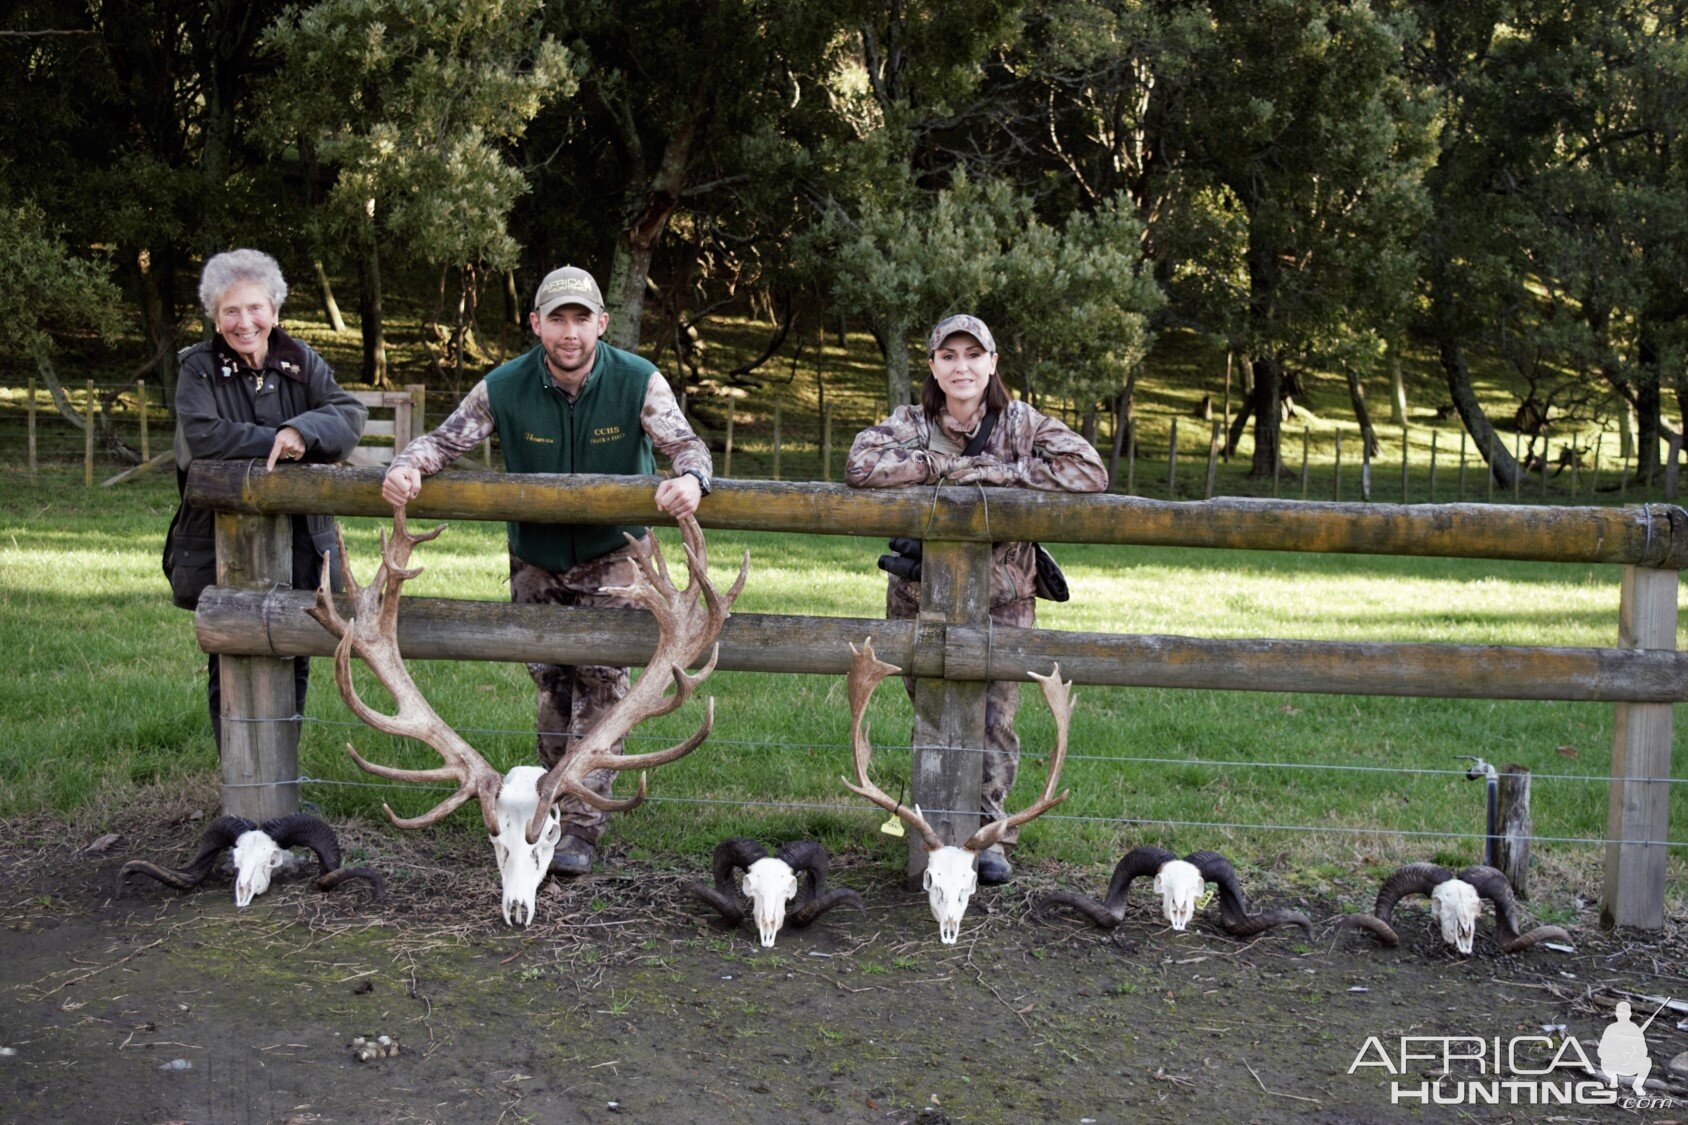 Ample Hunting, NZ